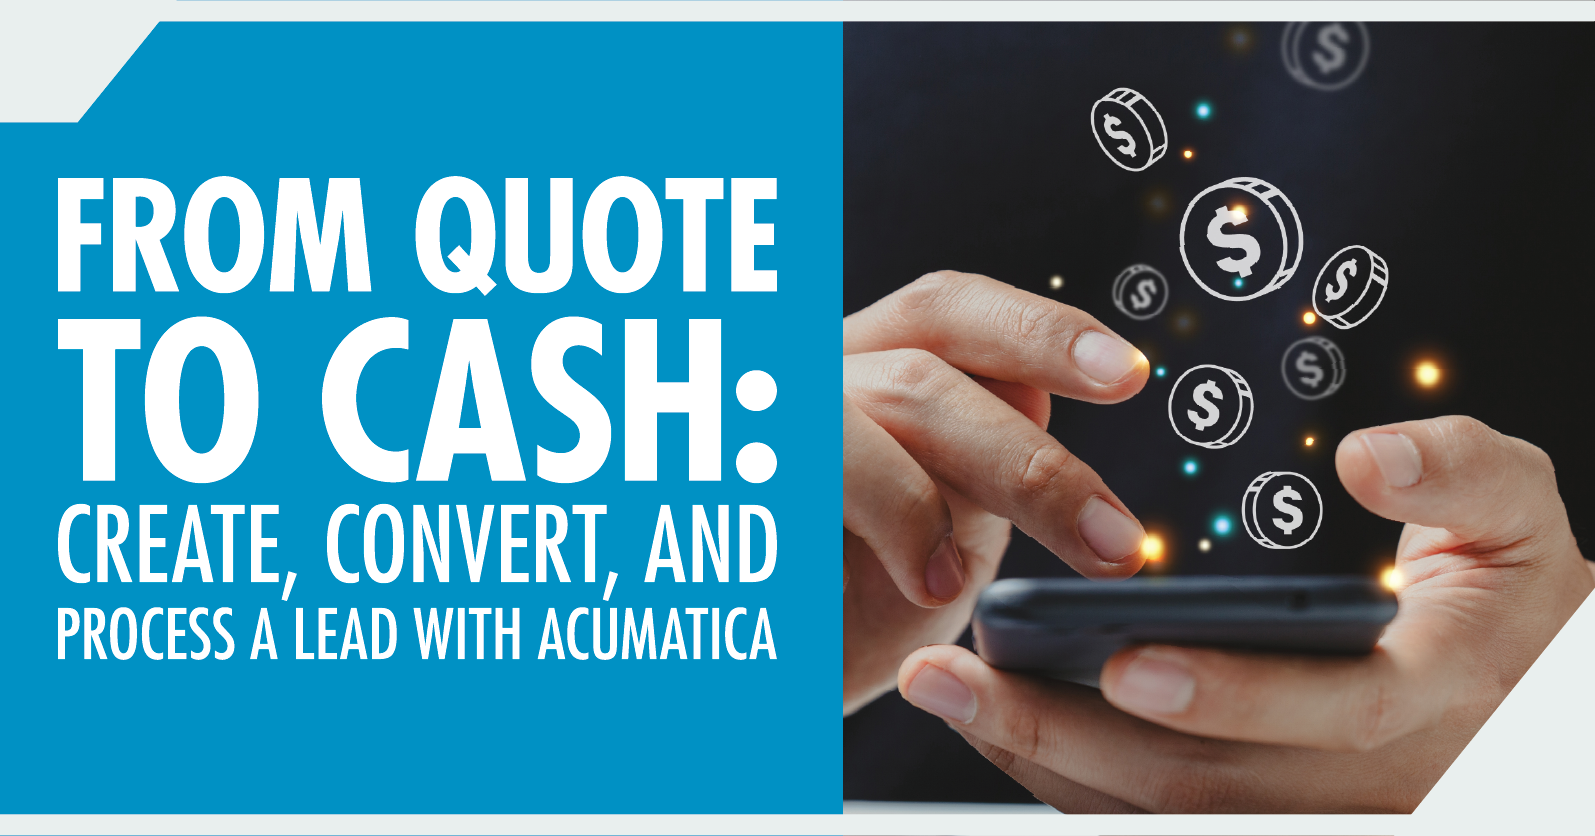 From Quote to Cash: Create, Convert, and Process a Lead with Acumatica